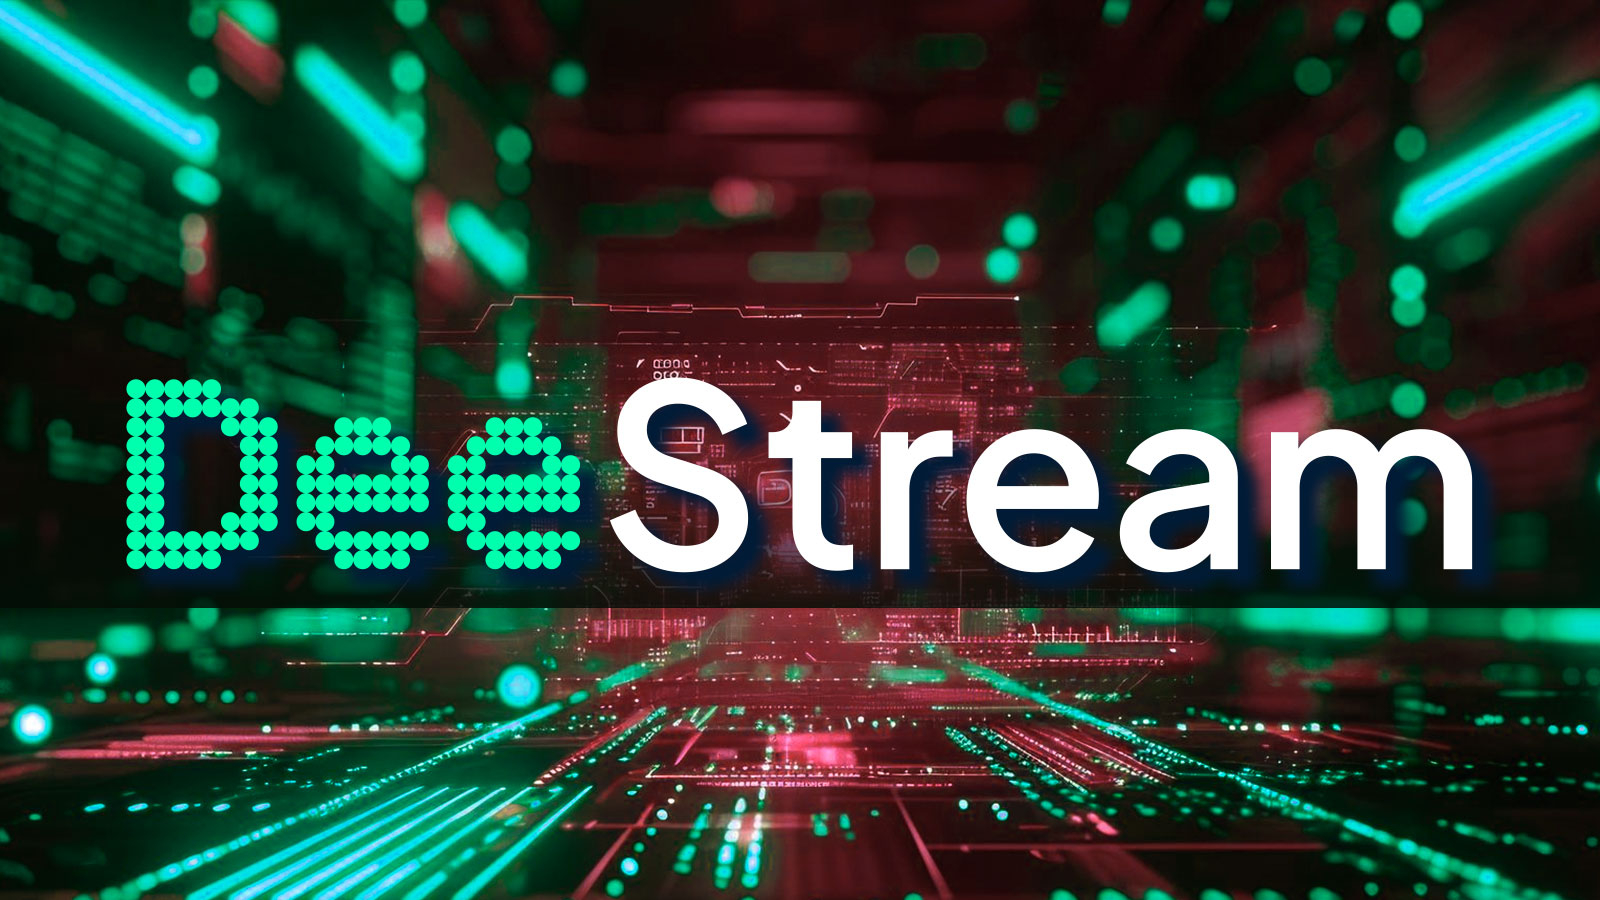 DeeStream (DST) Token Pre-Sale Might be Spotlighted in Early Q2 as Ethereum Classic (ETC) and Stellar Lumens (XLM) Top Altcoins Recover Fast